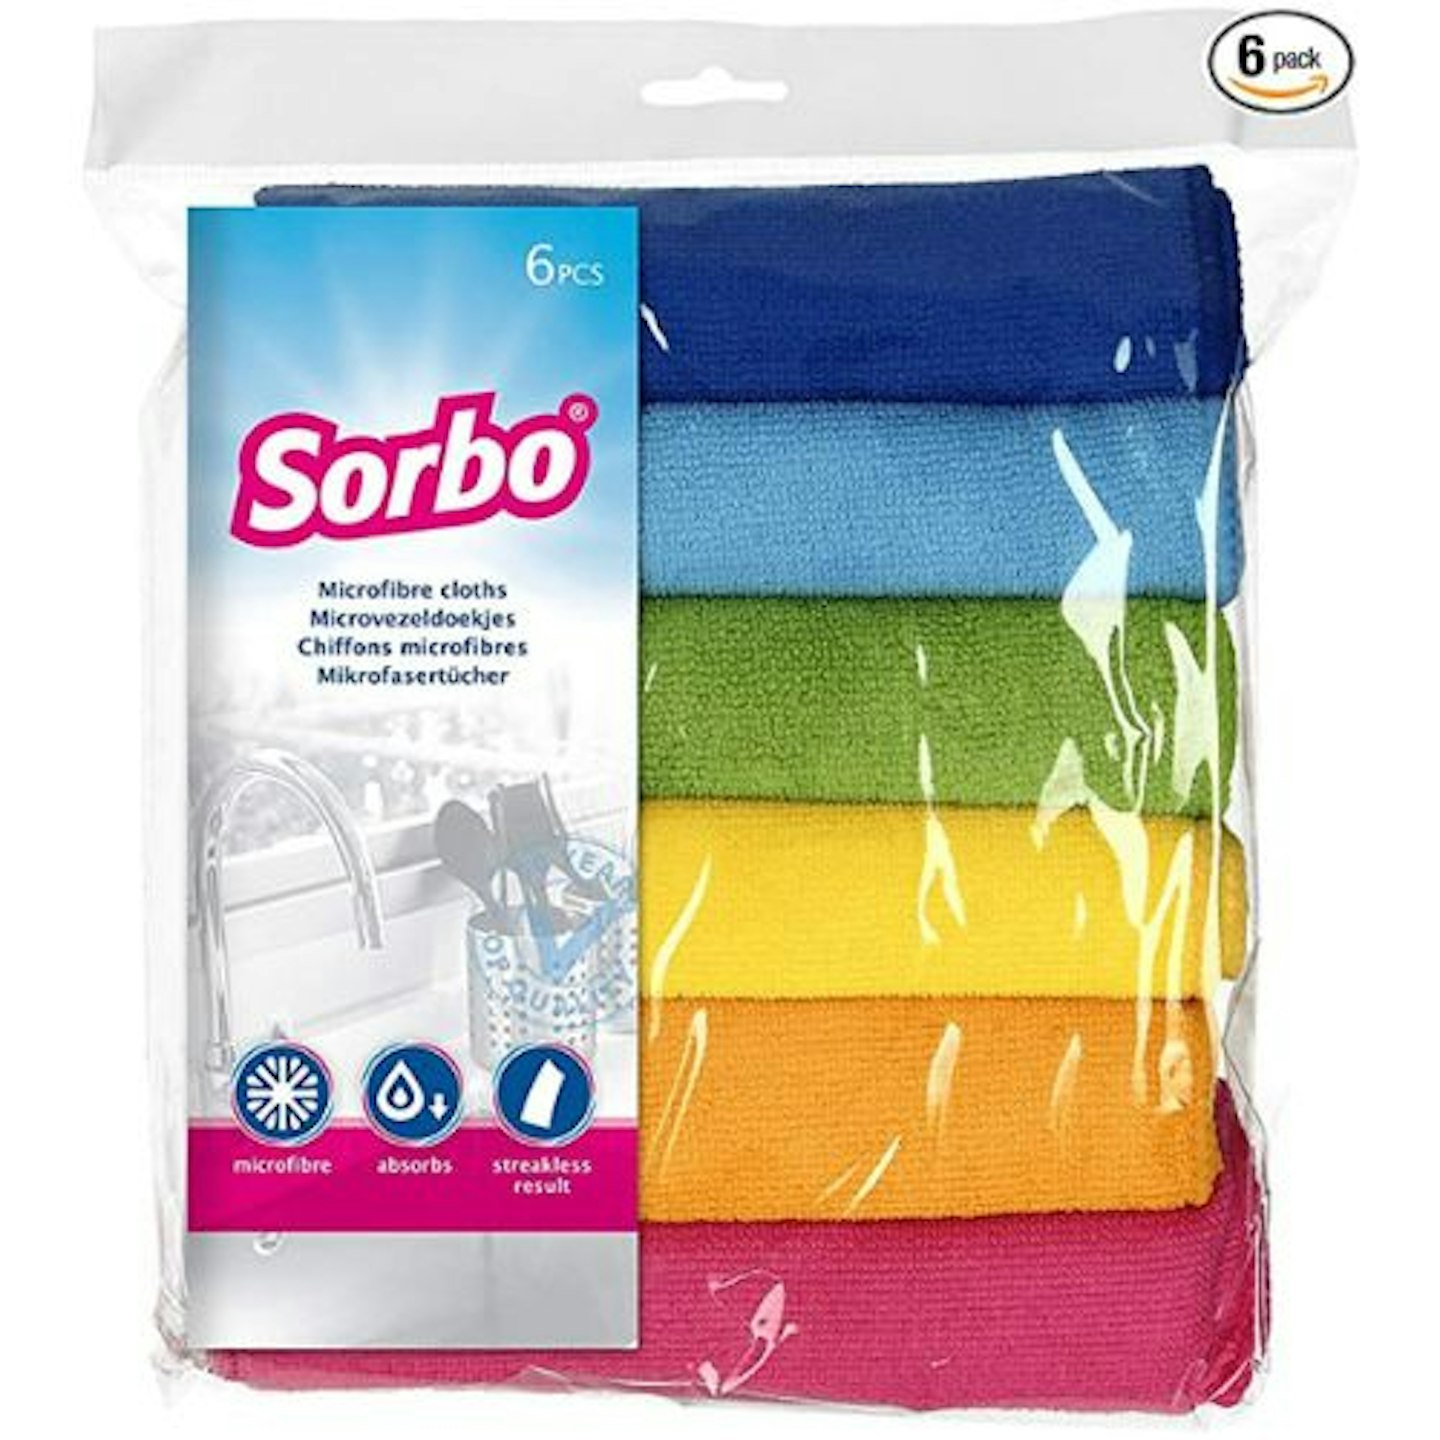 Sorbo 6 Pack Extra Large Microfibre Cleaning Cloths